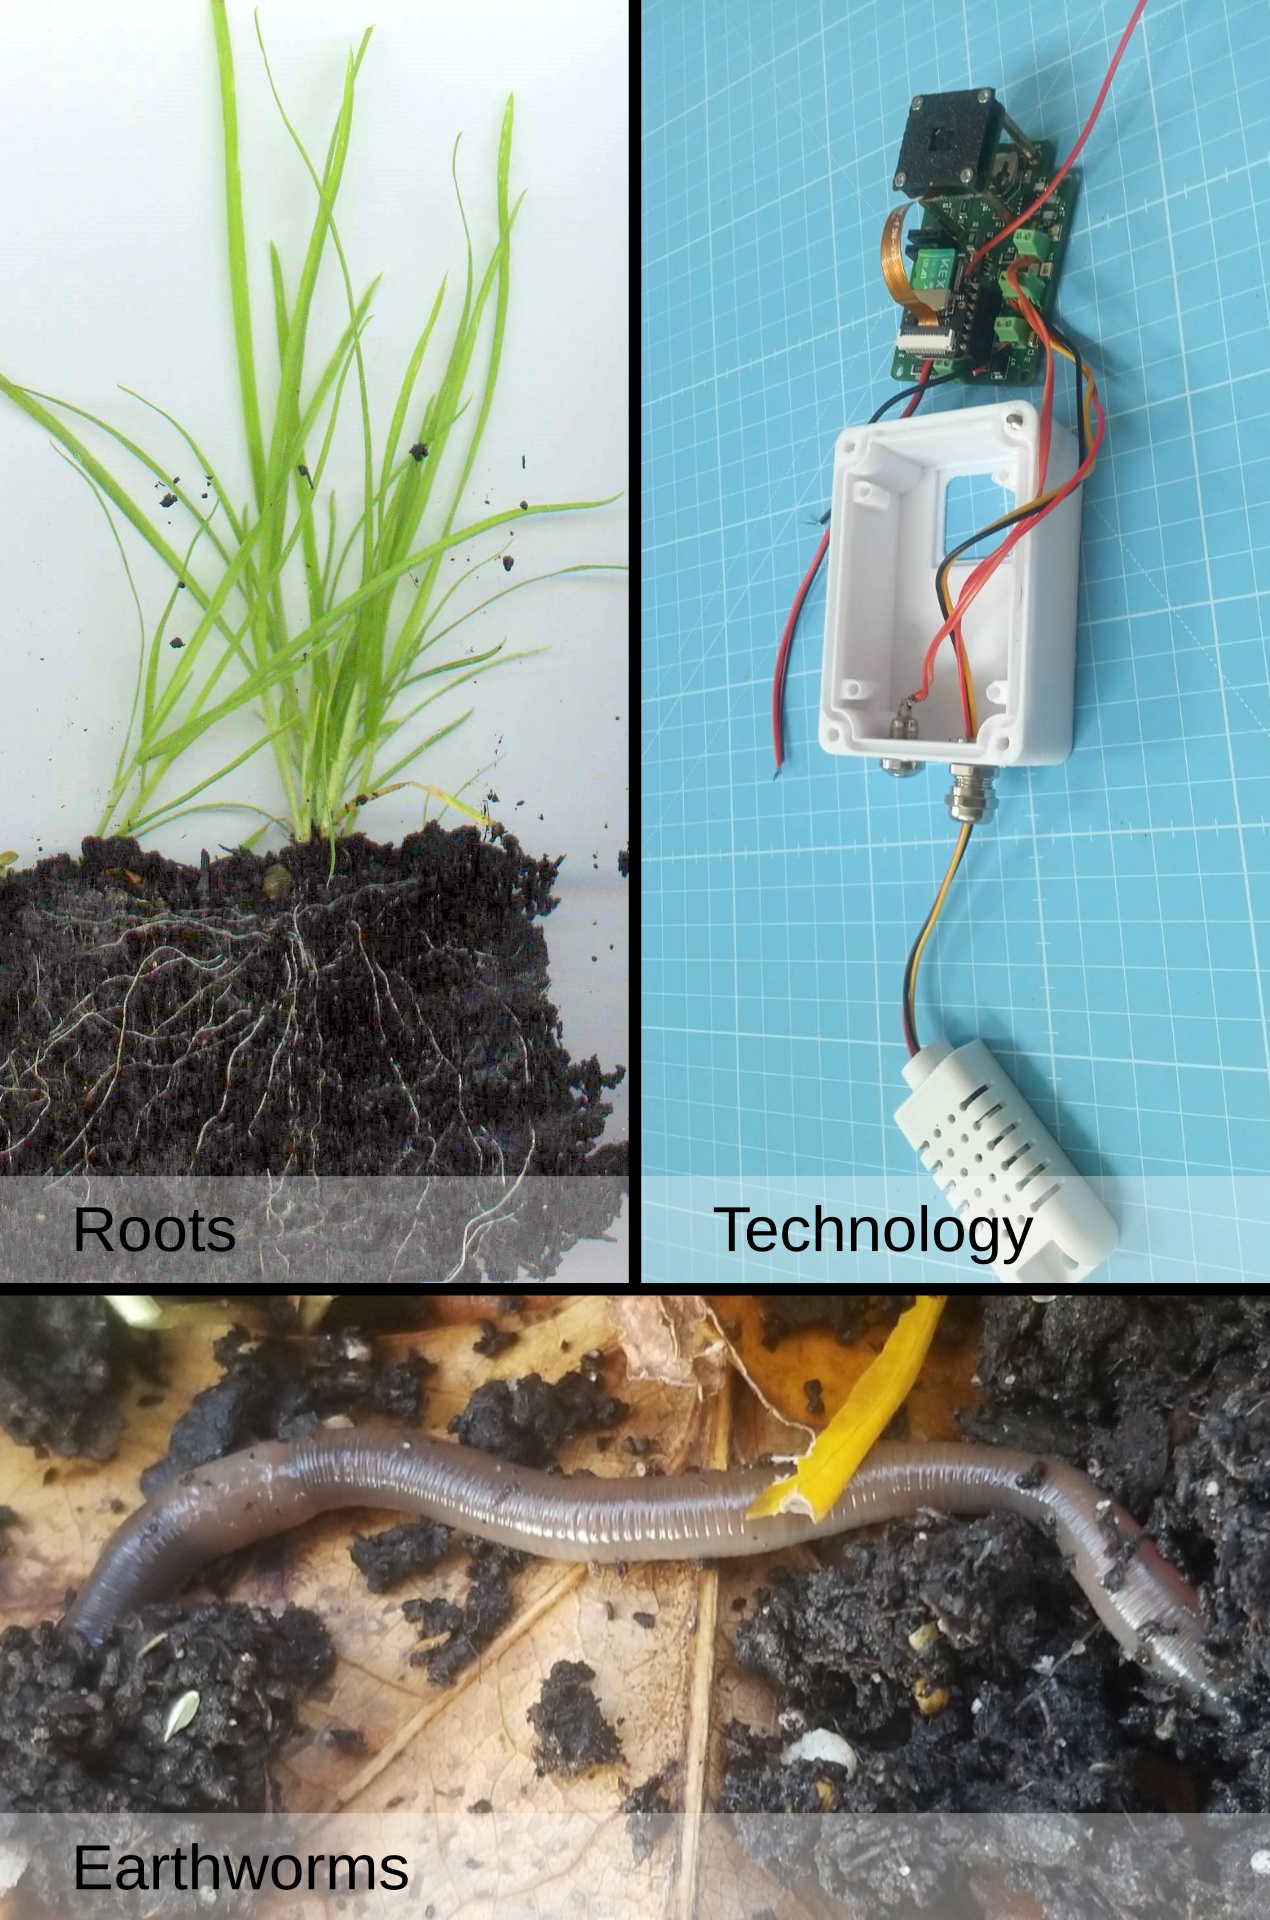 Custom Imaging Platform and Deep Learning to Identify and Phenotype Earthworms